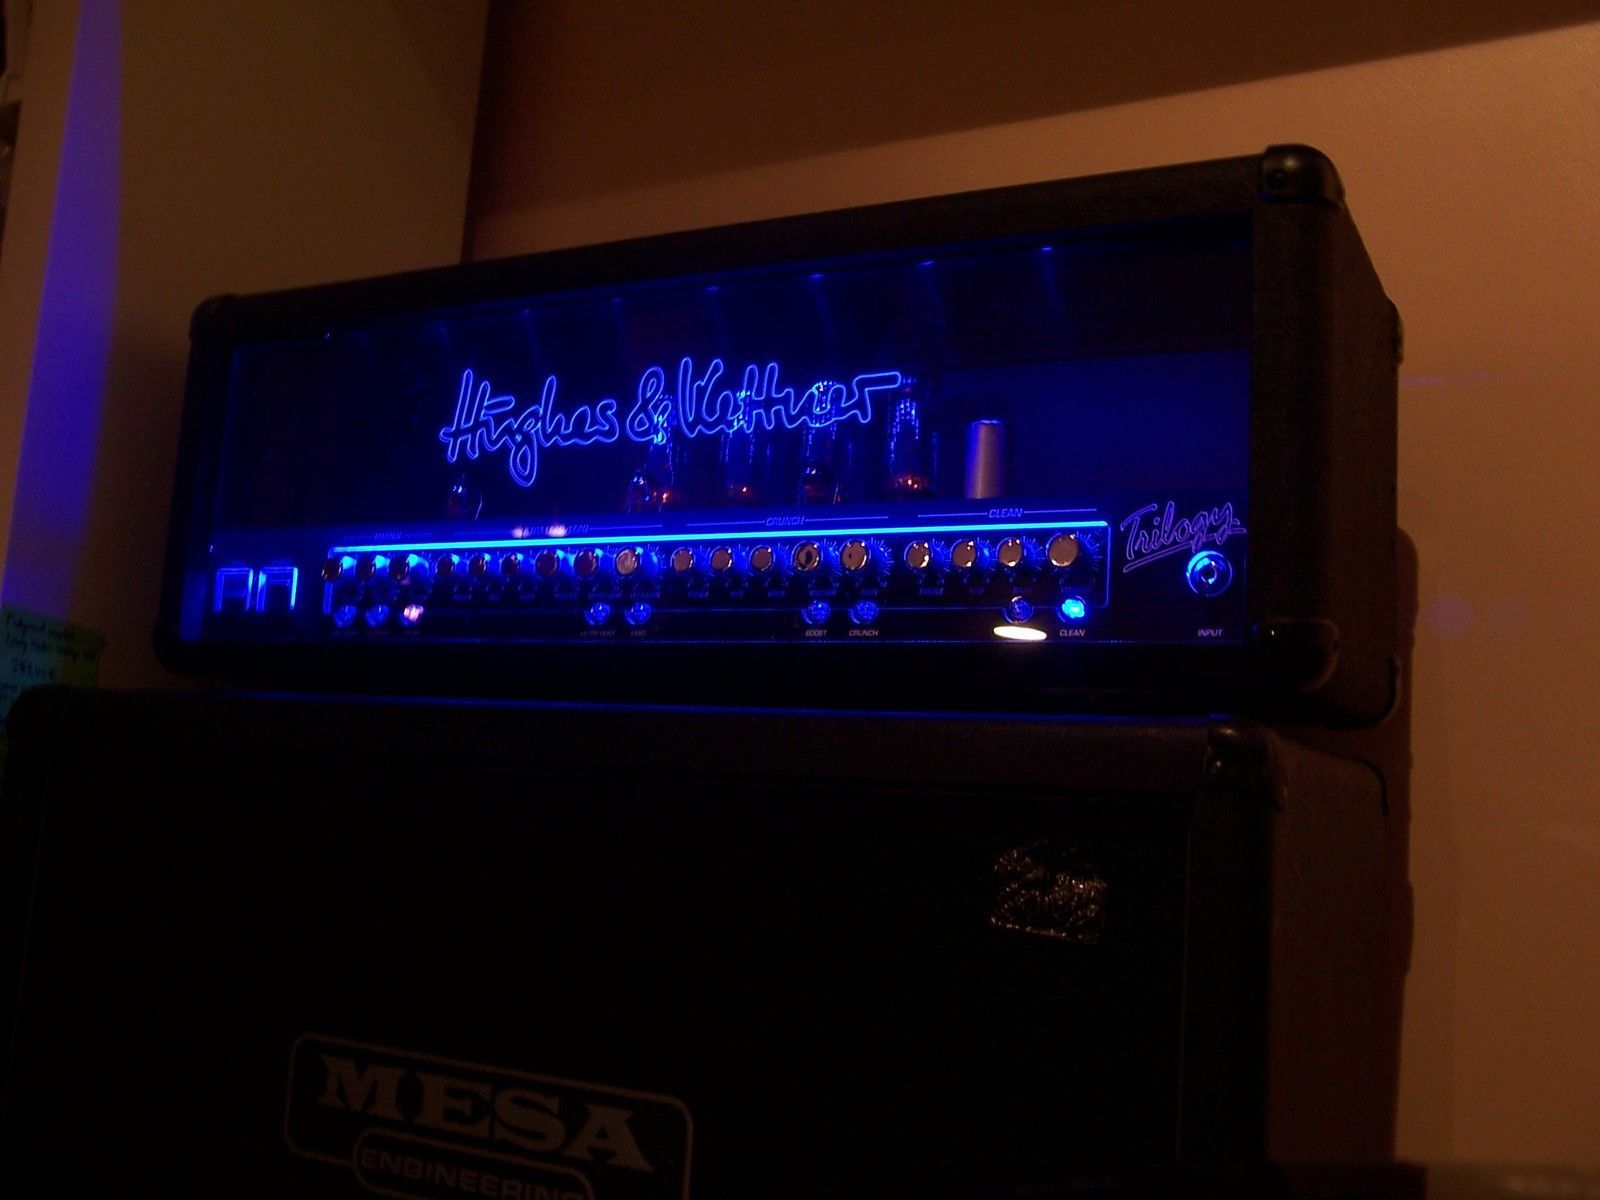 Hughes And Kettner Trilogy Review